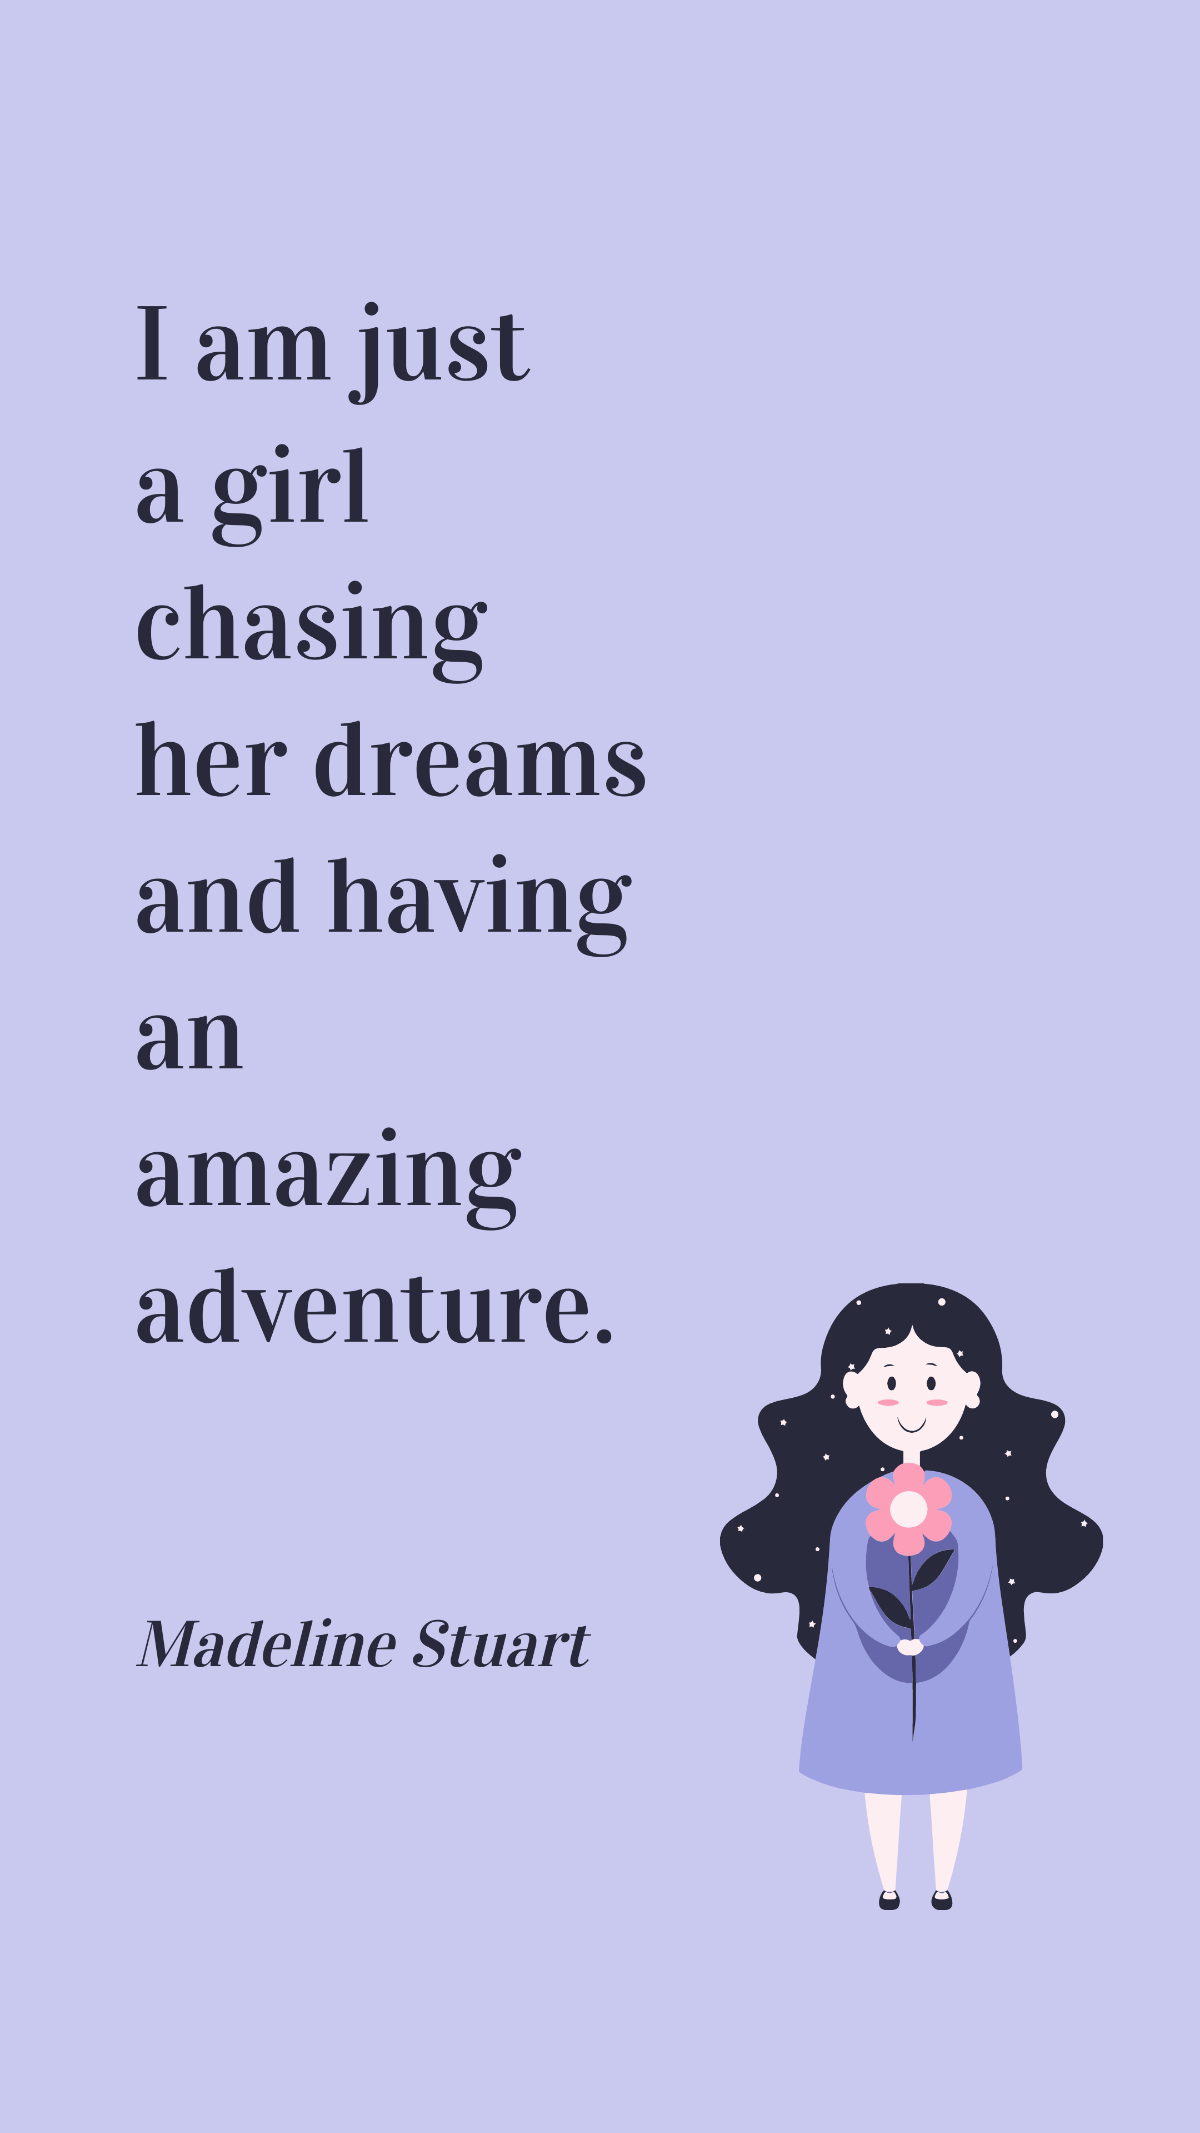 Madeline Stuart - I am just a girl chasing her dreams and having an amazing adventure. Template